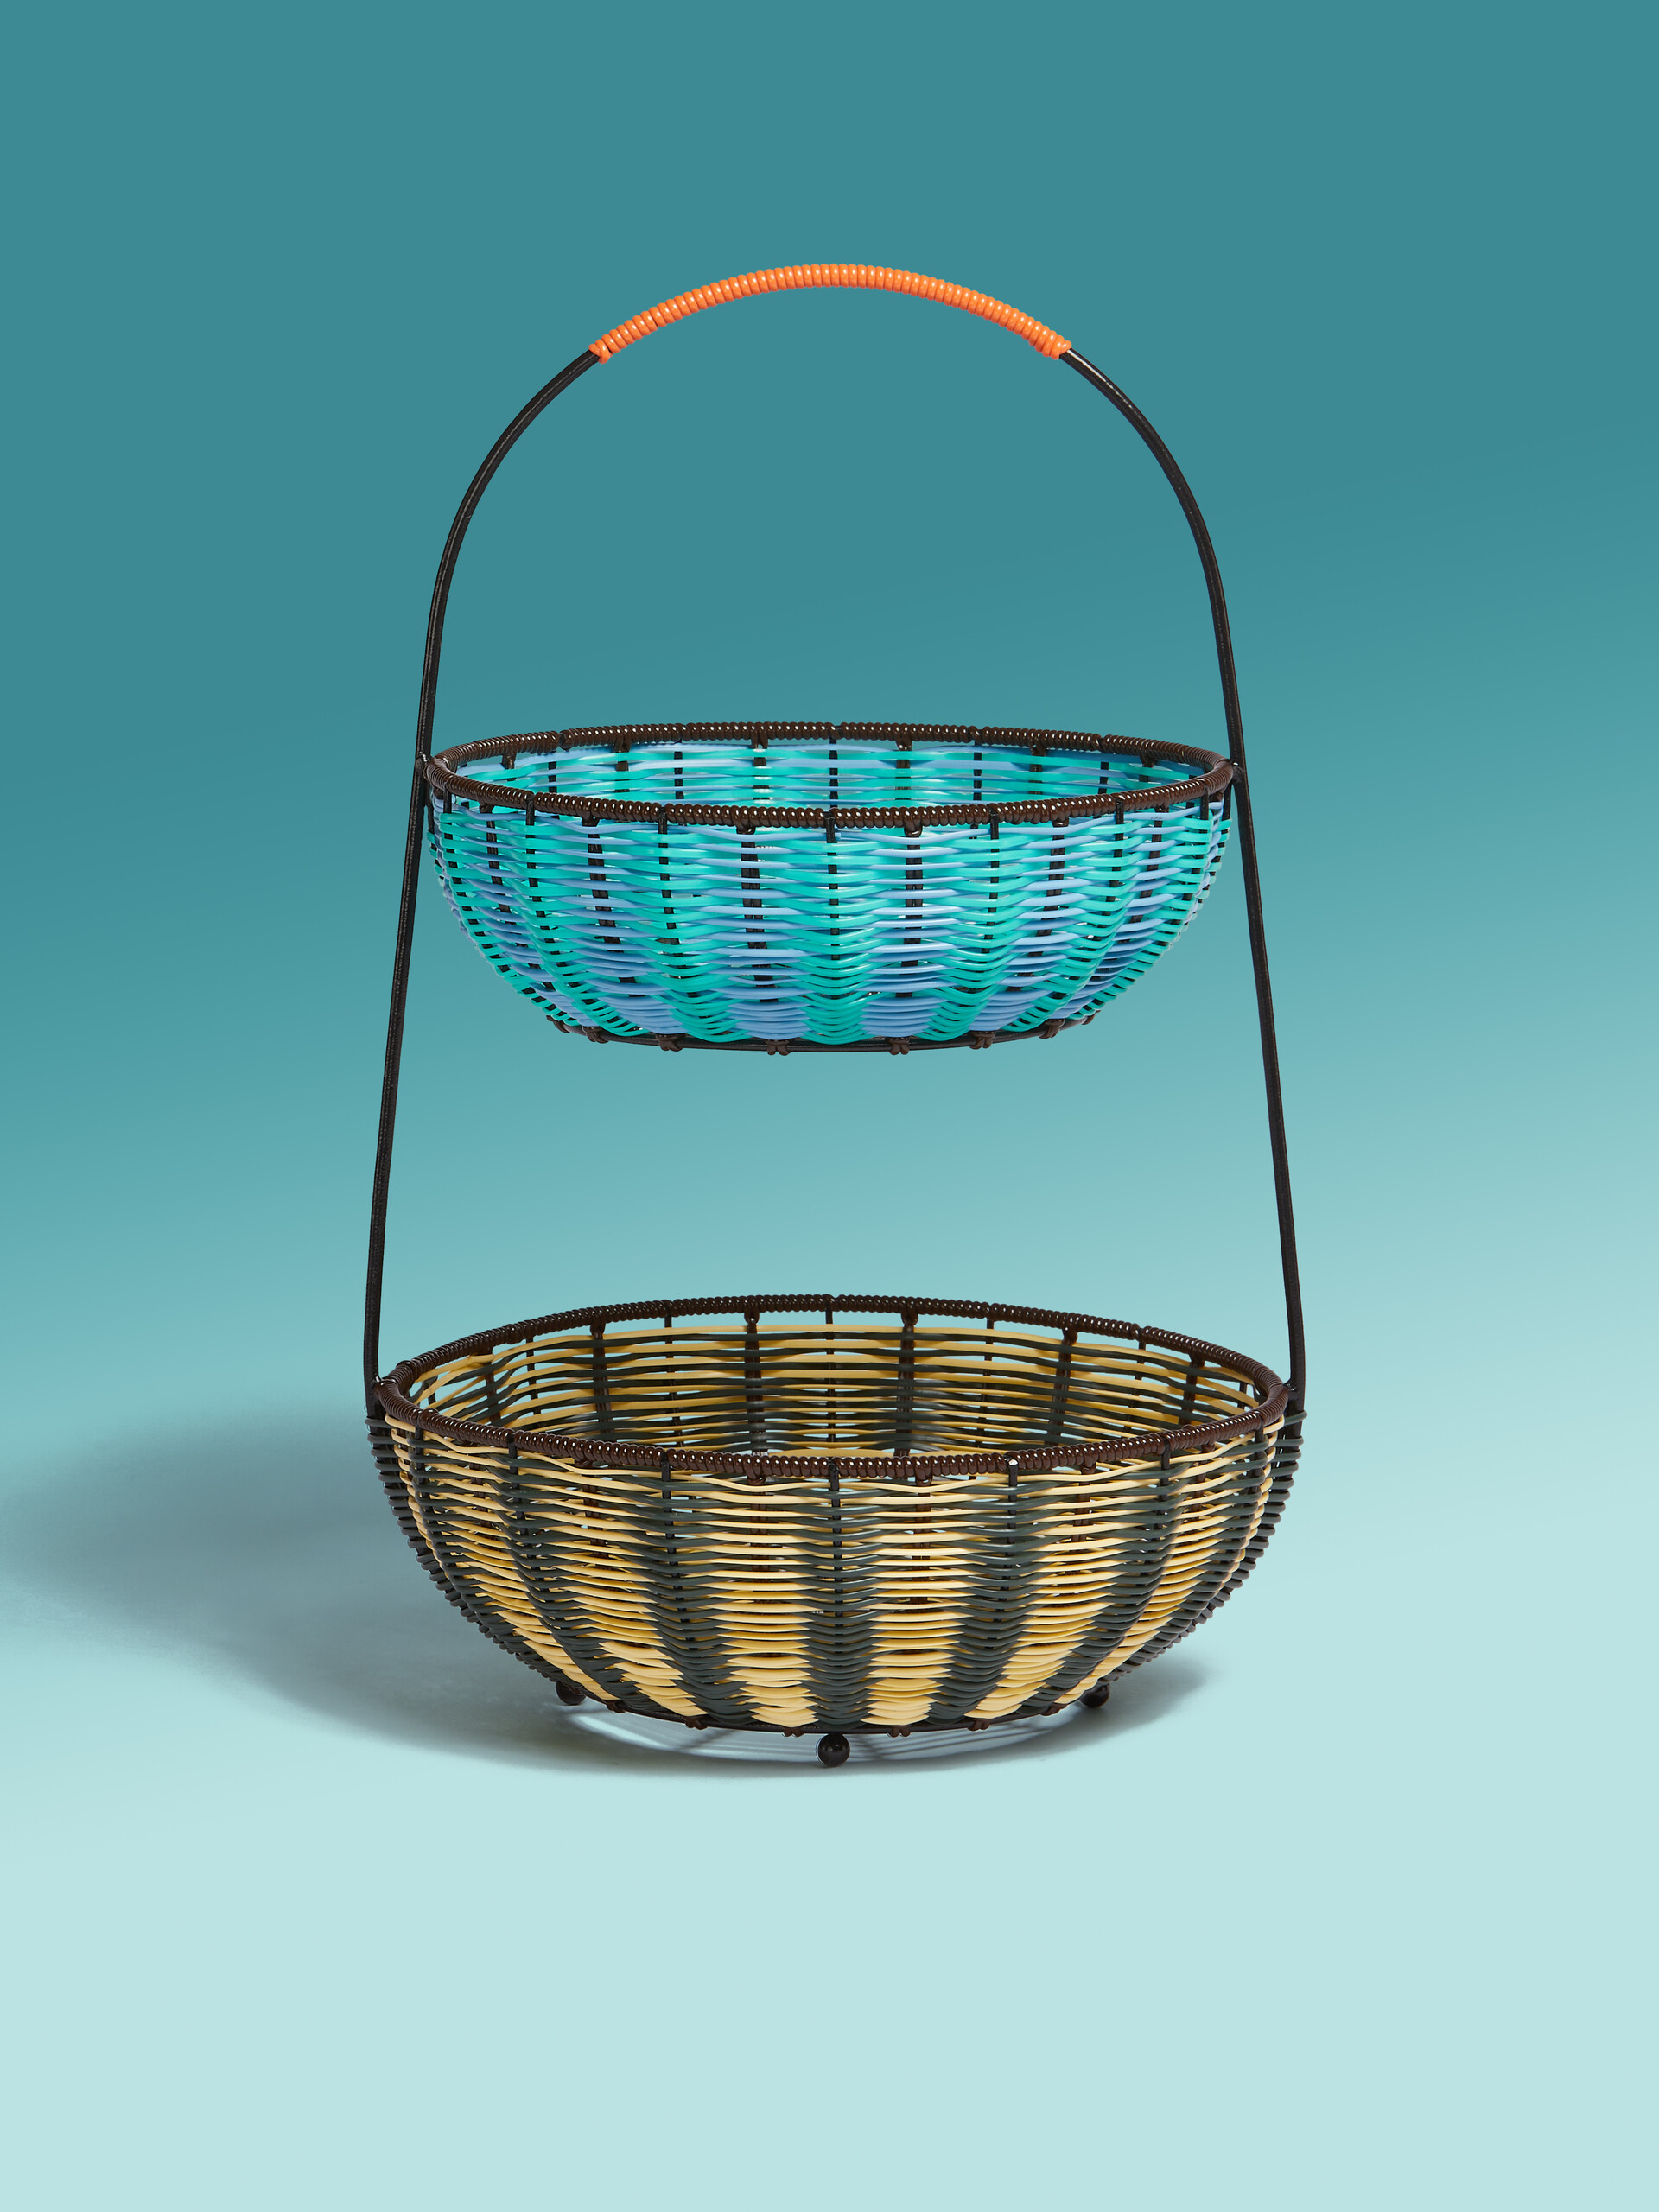 Two-tone MARNI MARKET two-tier woven cable fruit stand - Accessories - Image 1